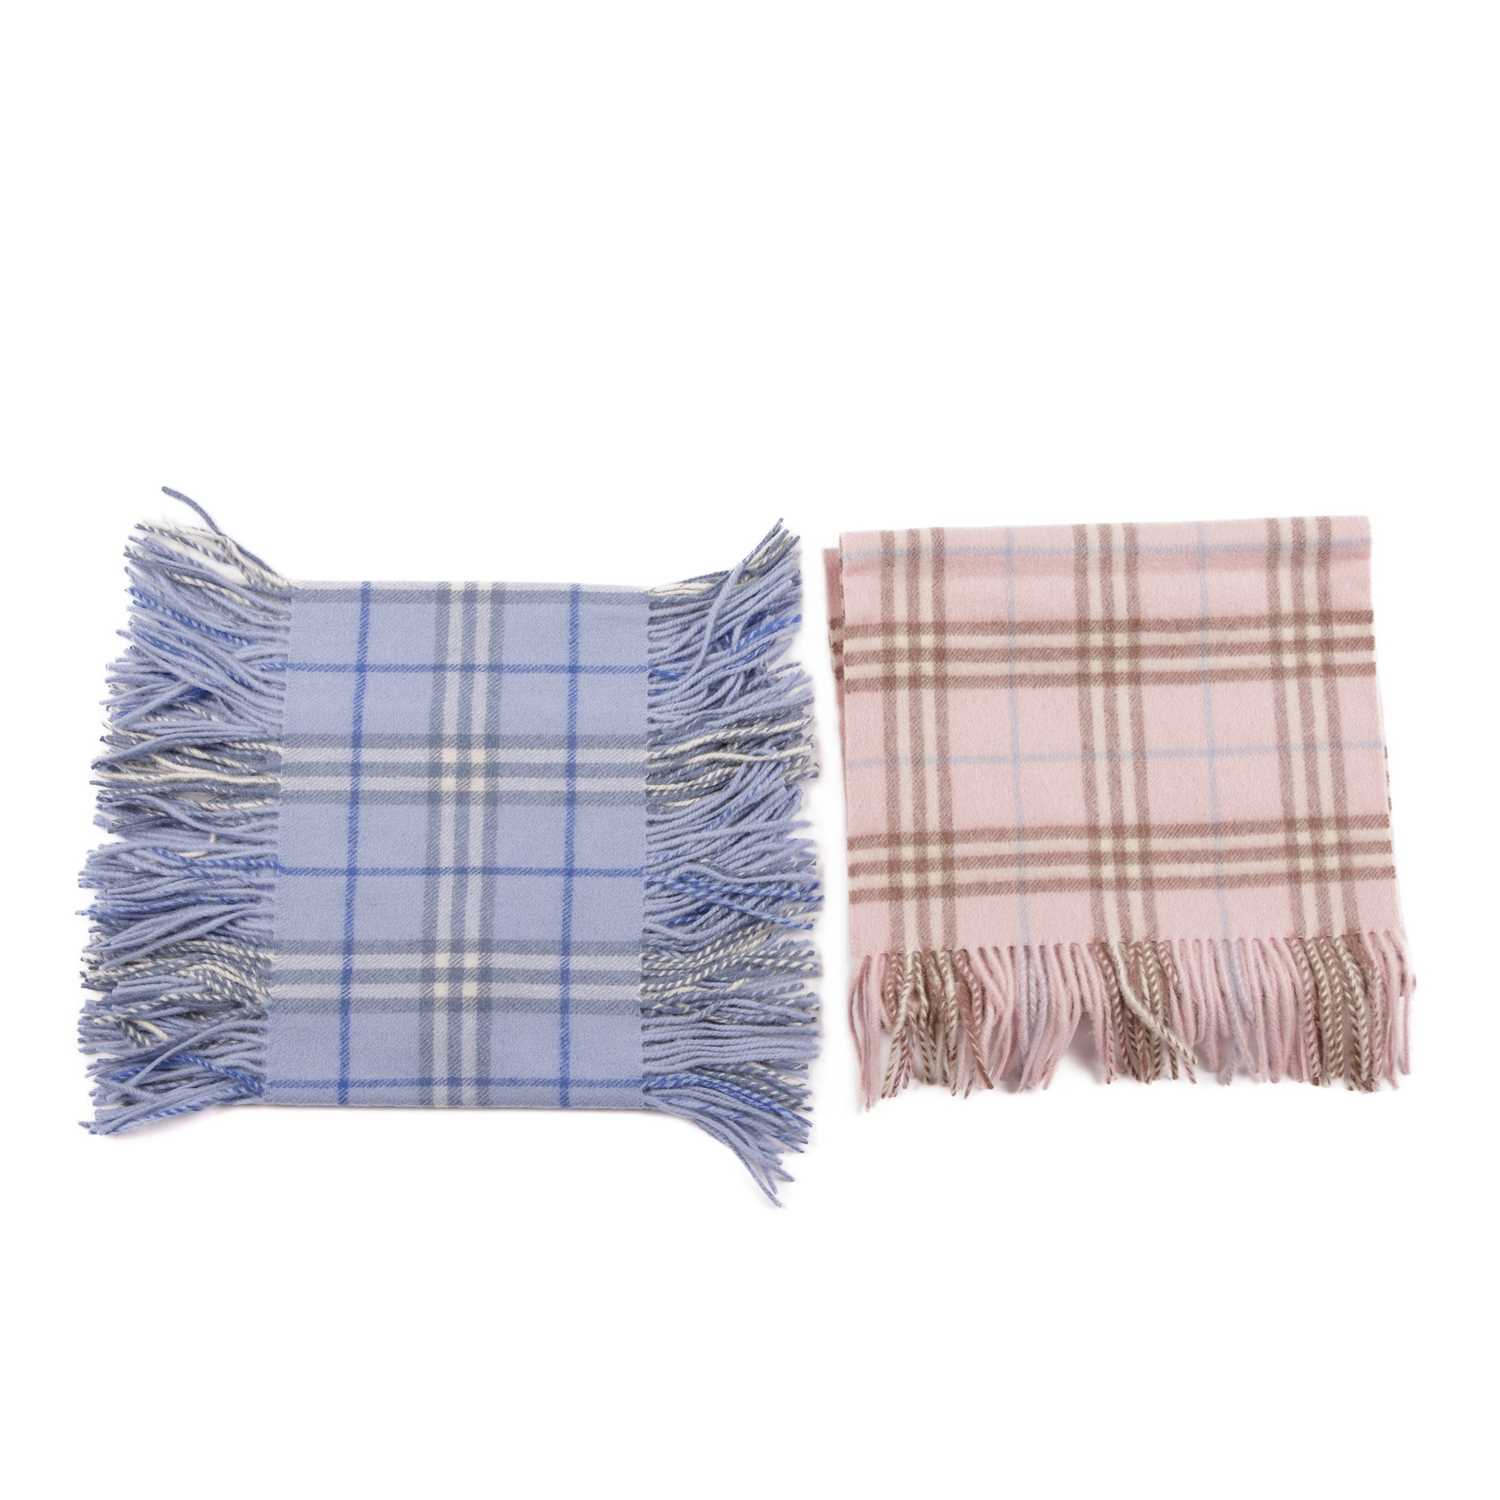 Burberry, two Nova Check lambswool scarves, to include a rose pink scarf with fringe detailing at